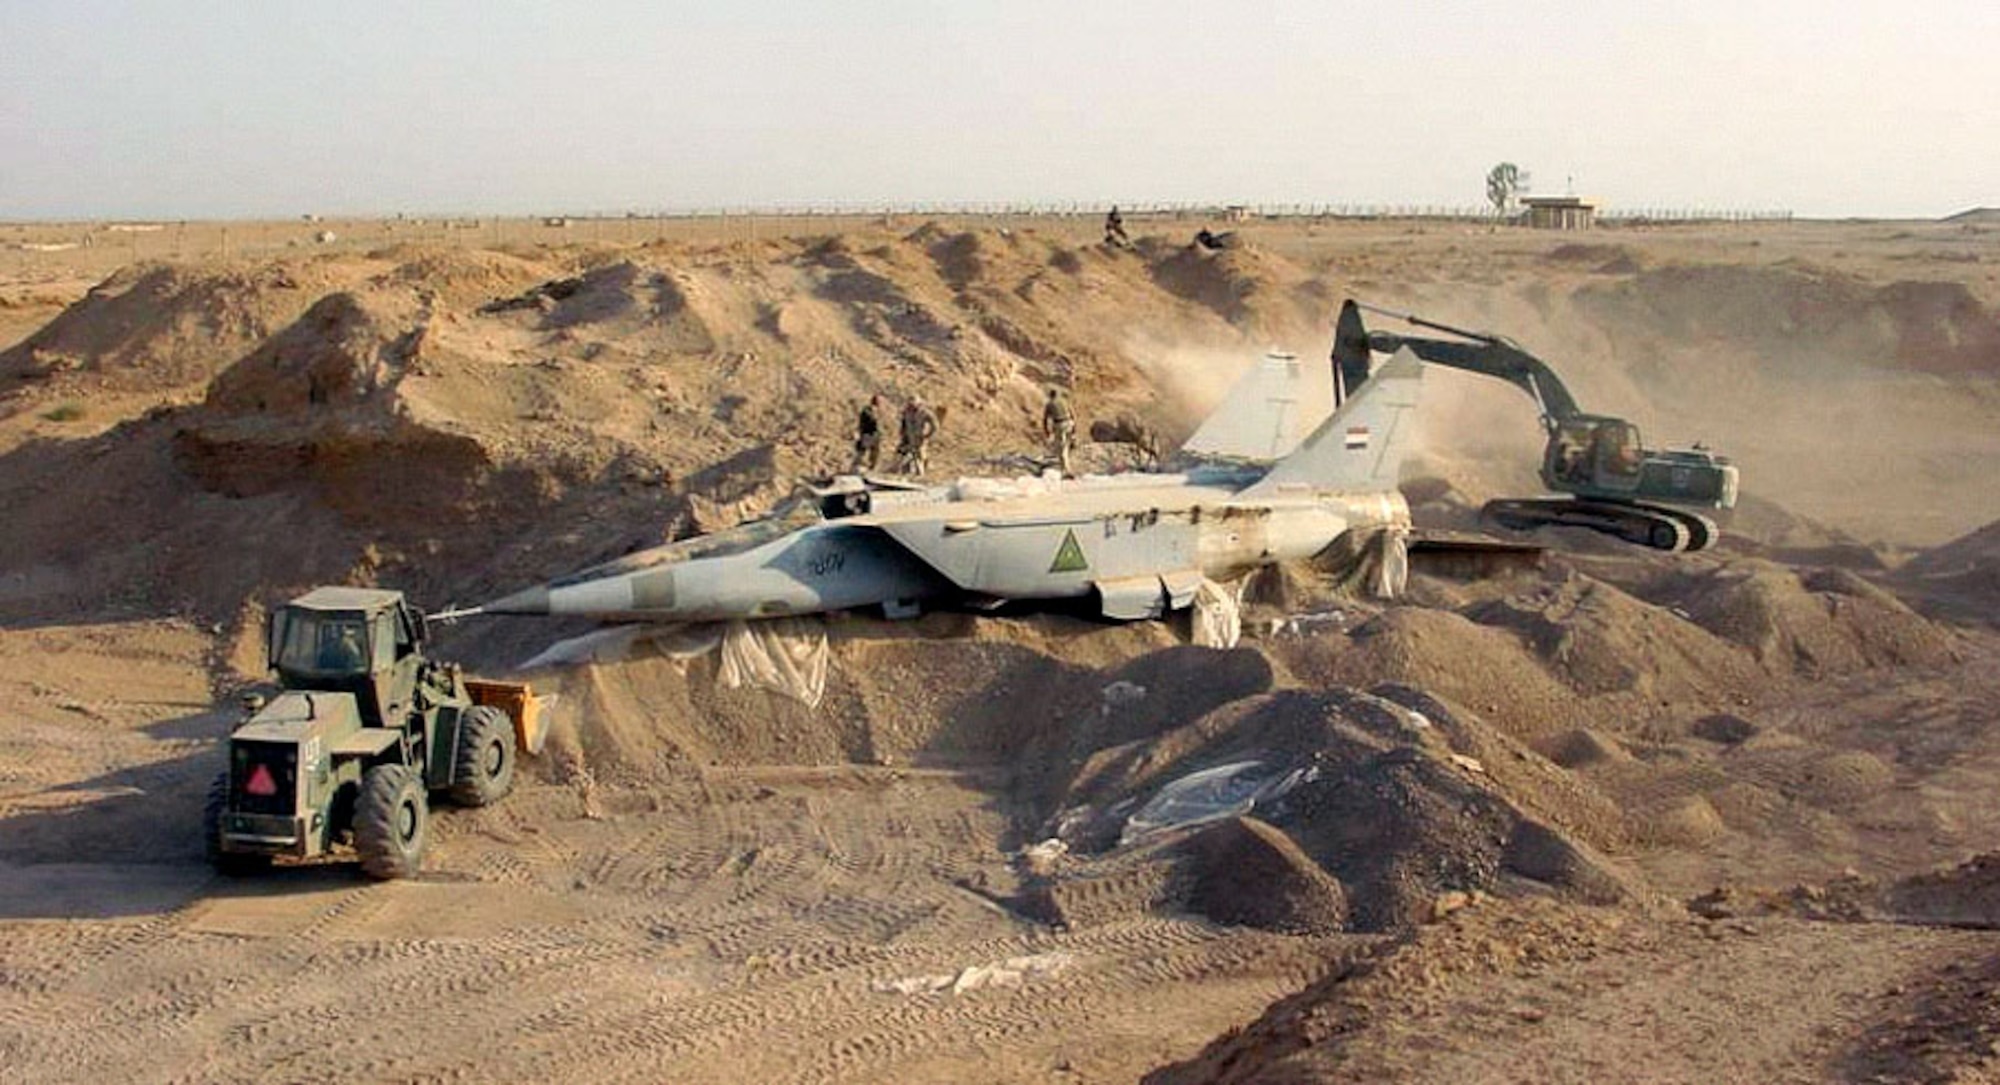 OPERATION IRAQI FREEDOM -- A search team discovers a MiG-25 Foxbat buried beneath the sands in Iraq. Several MiG-25 interceptors and Su-25 ground attack jets have been found buried at Al-Taqqadum air field west of Baghdad. (U.S. Air Force photo by Master Sgt. T. Collins)